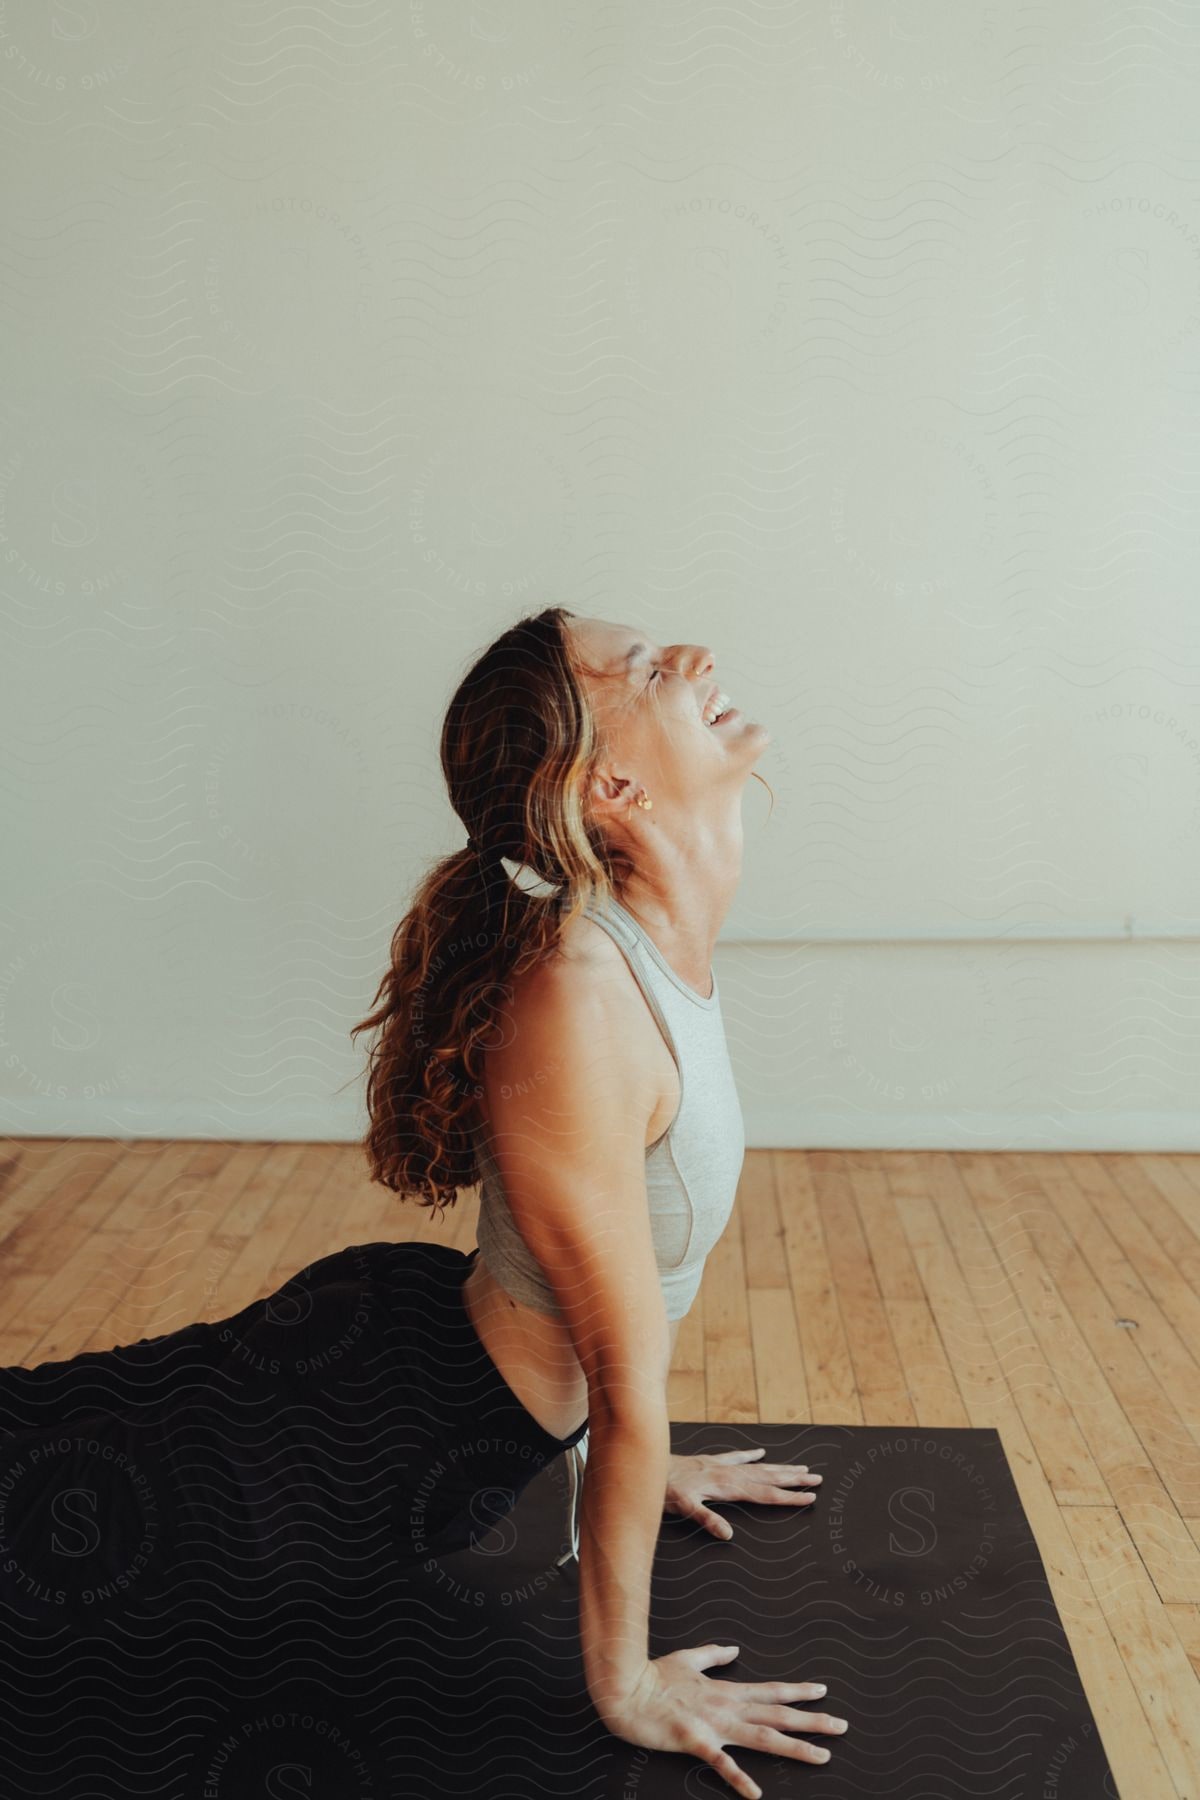 A woman smiles while she holds her upper torso upright as she performs a yoga pose.